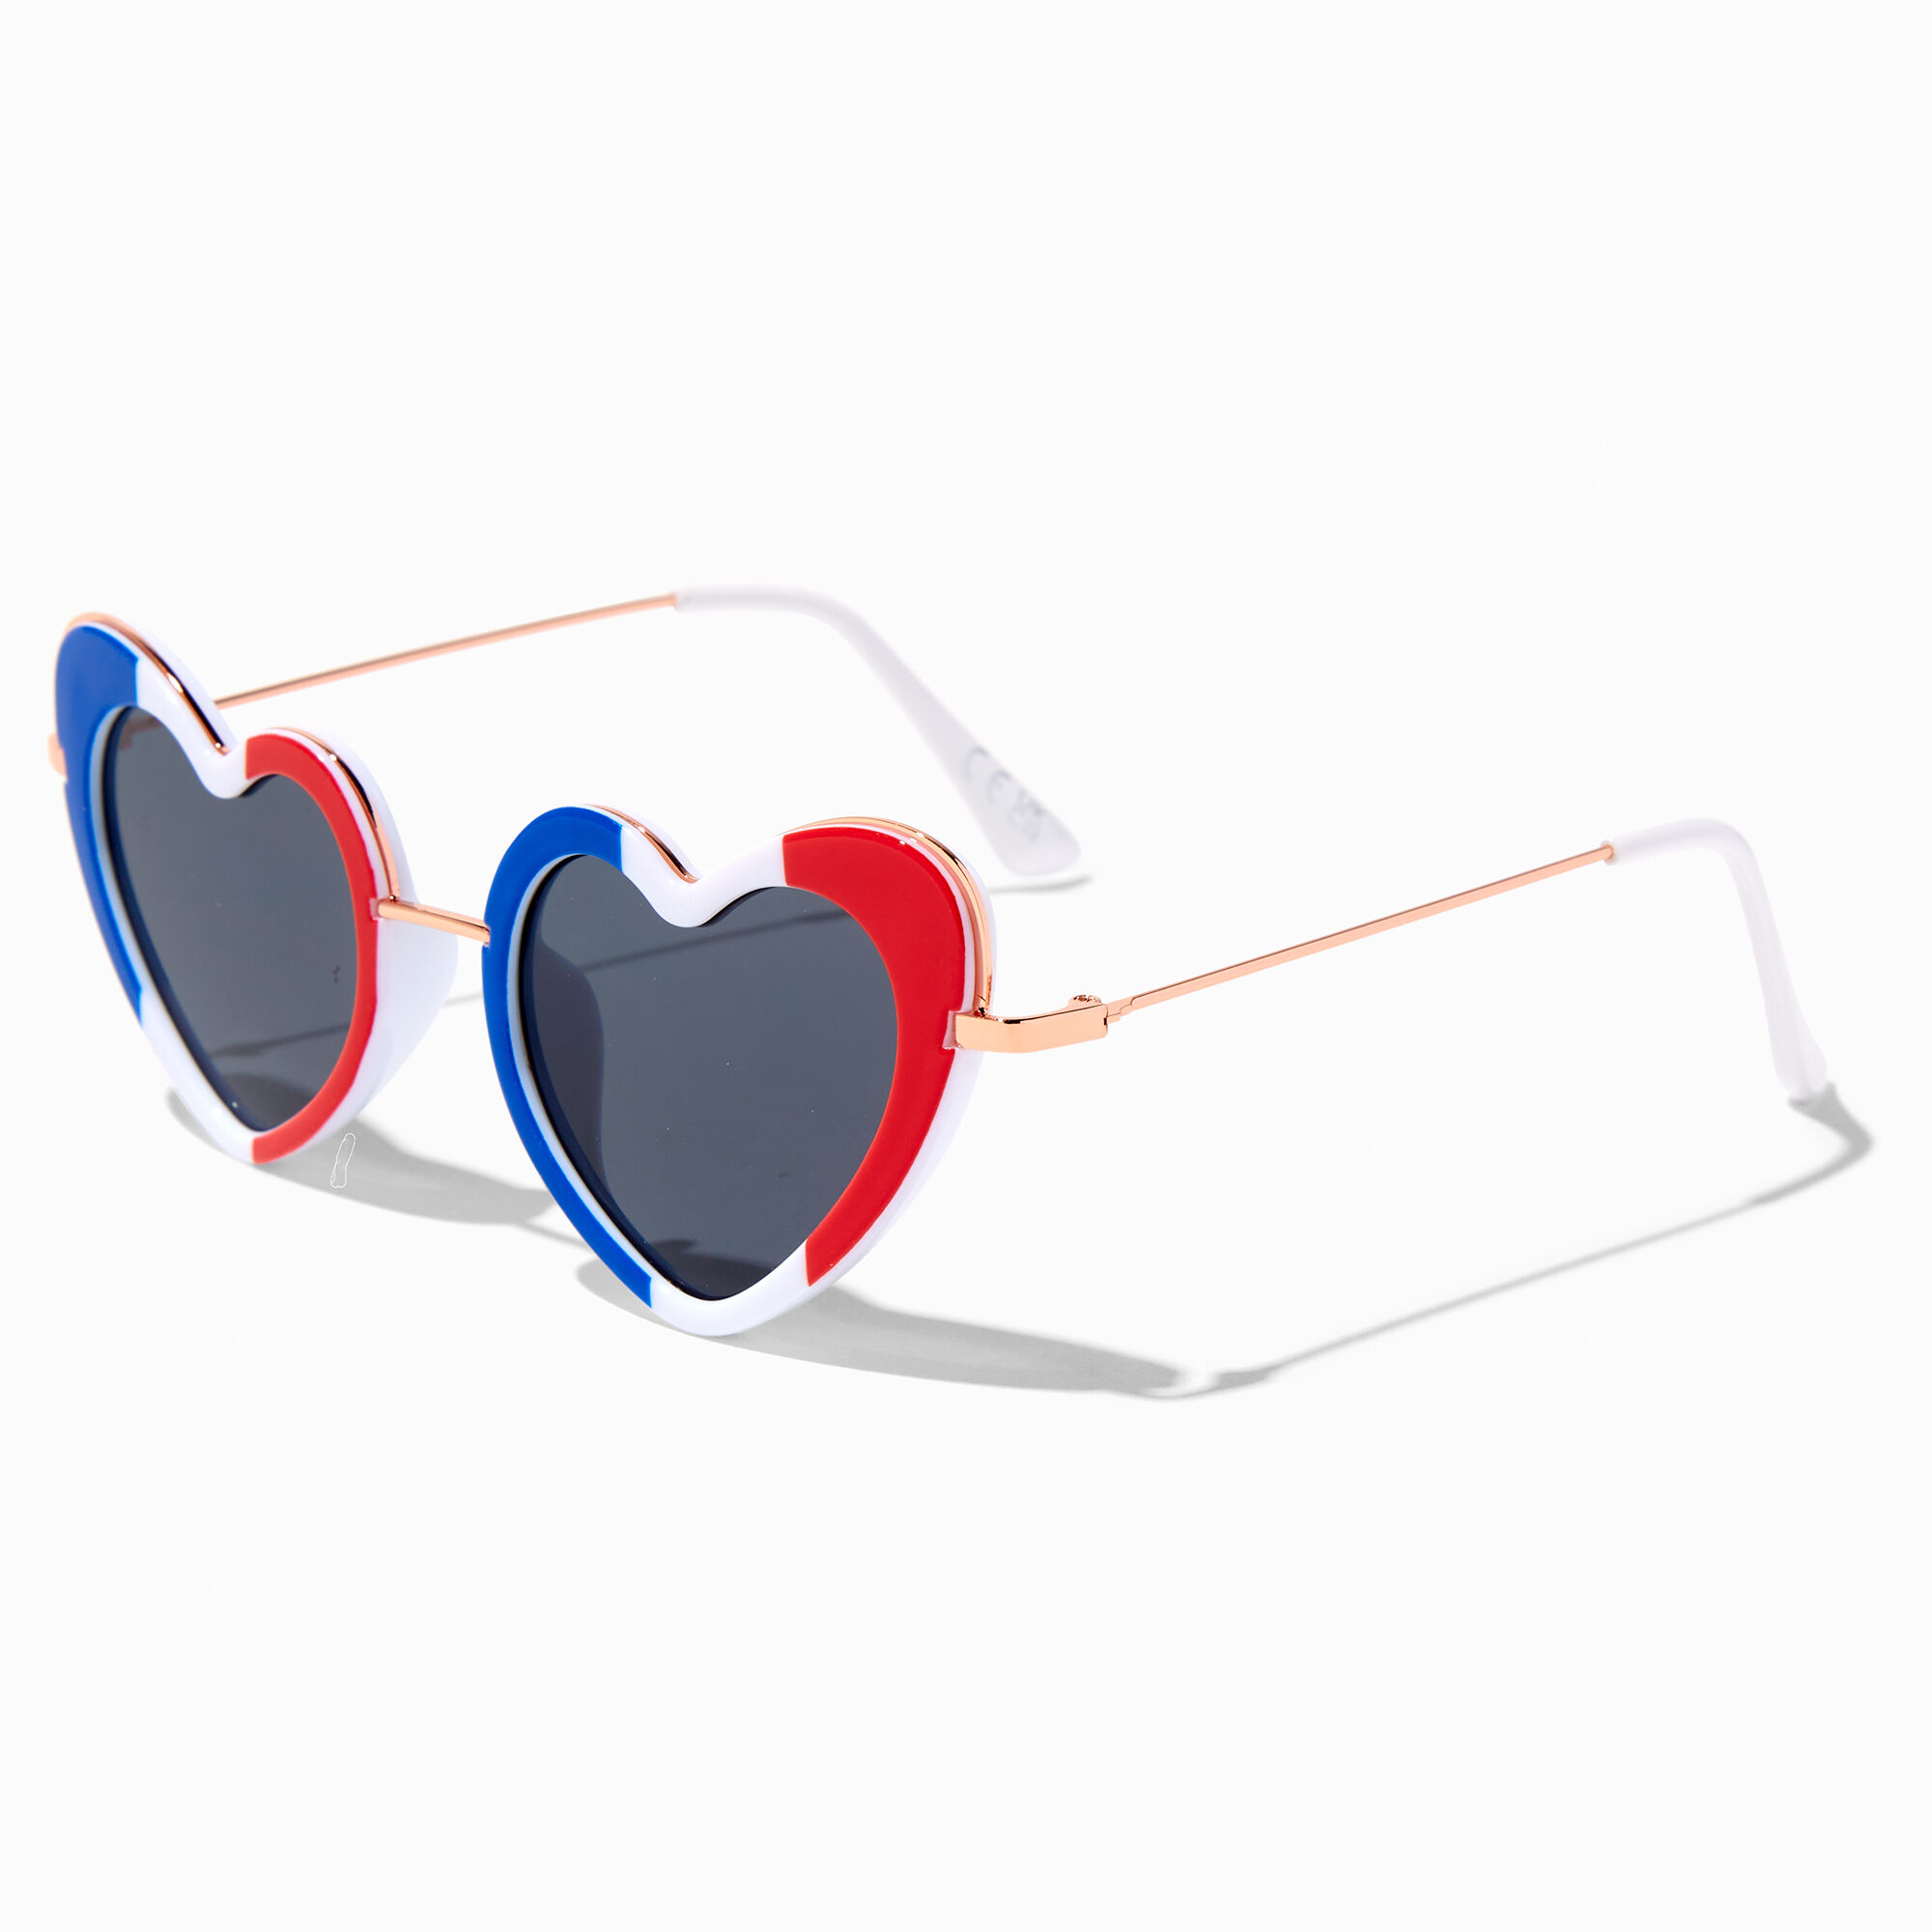 View Claires Blue White Heart Shaped Sunglasses Red information